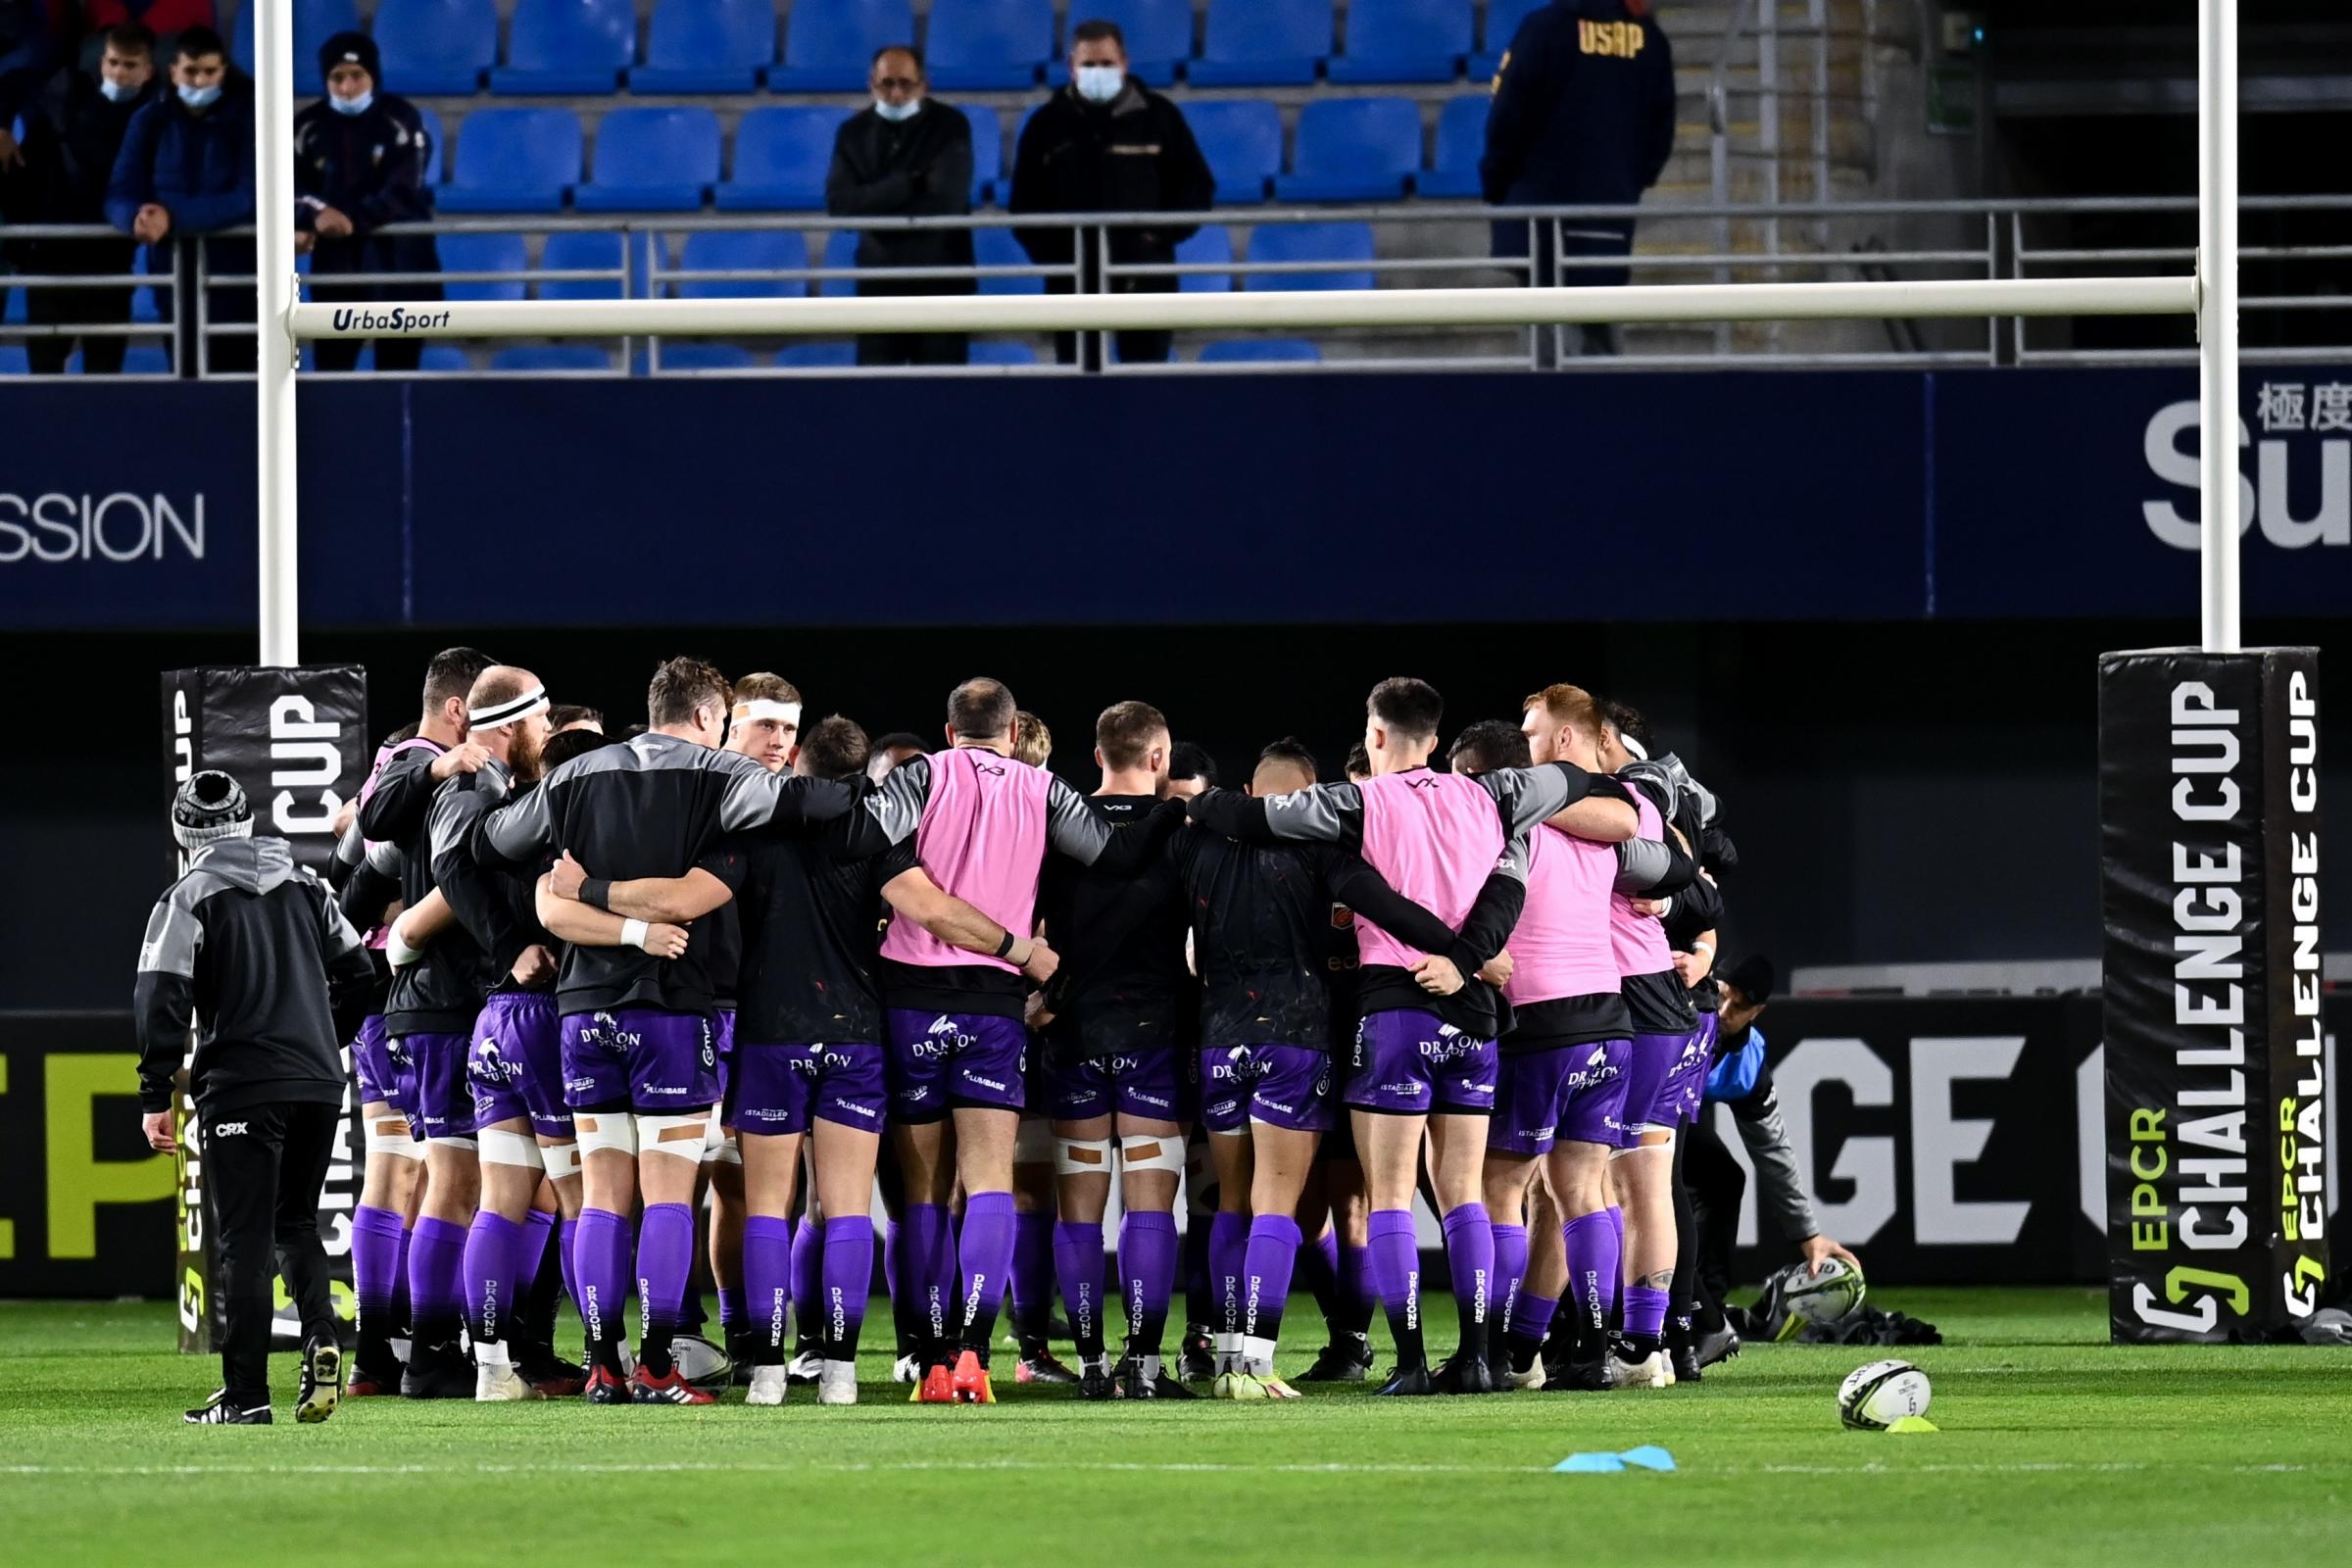 The Dragons huddle before facing Perpignan in the Challenge Cup